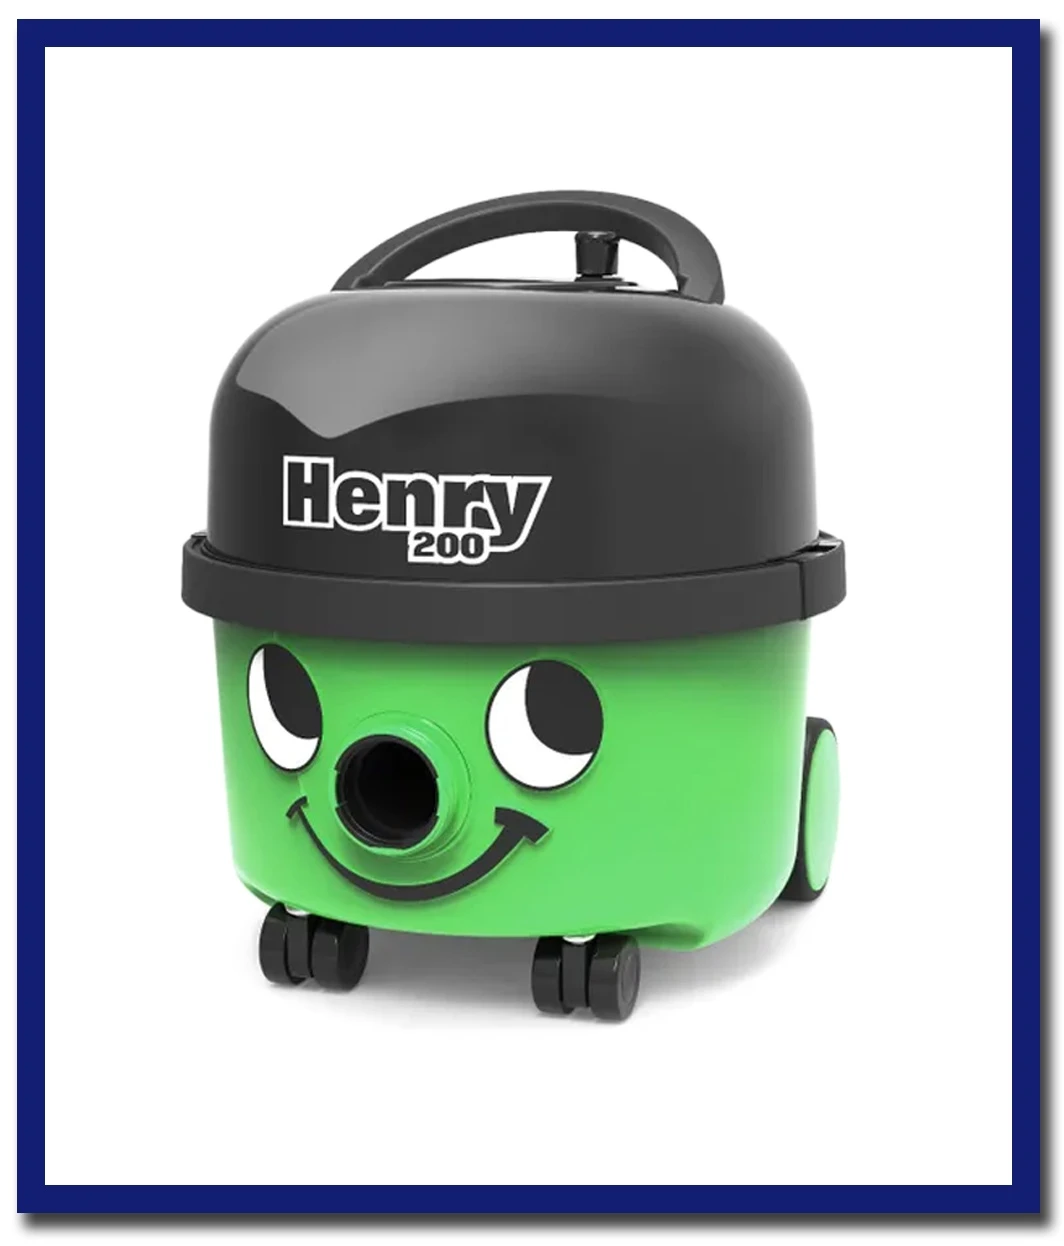 Numatic HVR200 Henry Commercial Dry Vacuum - Stone Doctor Australia - Cleaning Equipment > Machinery > Dry Vacuum